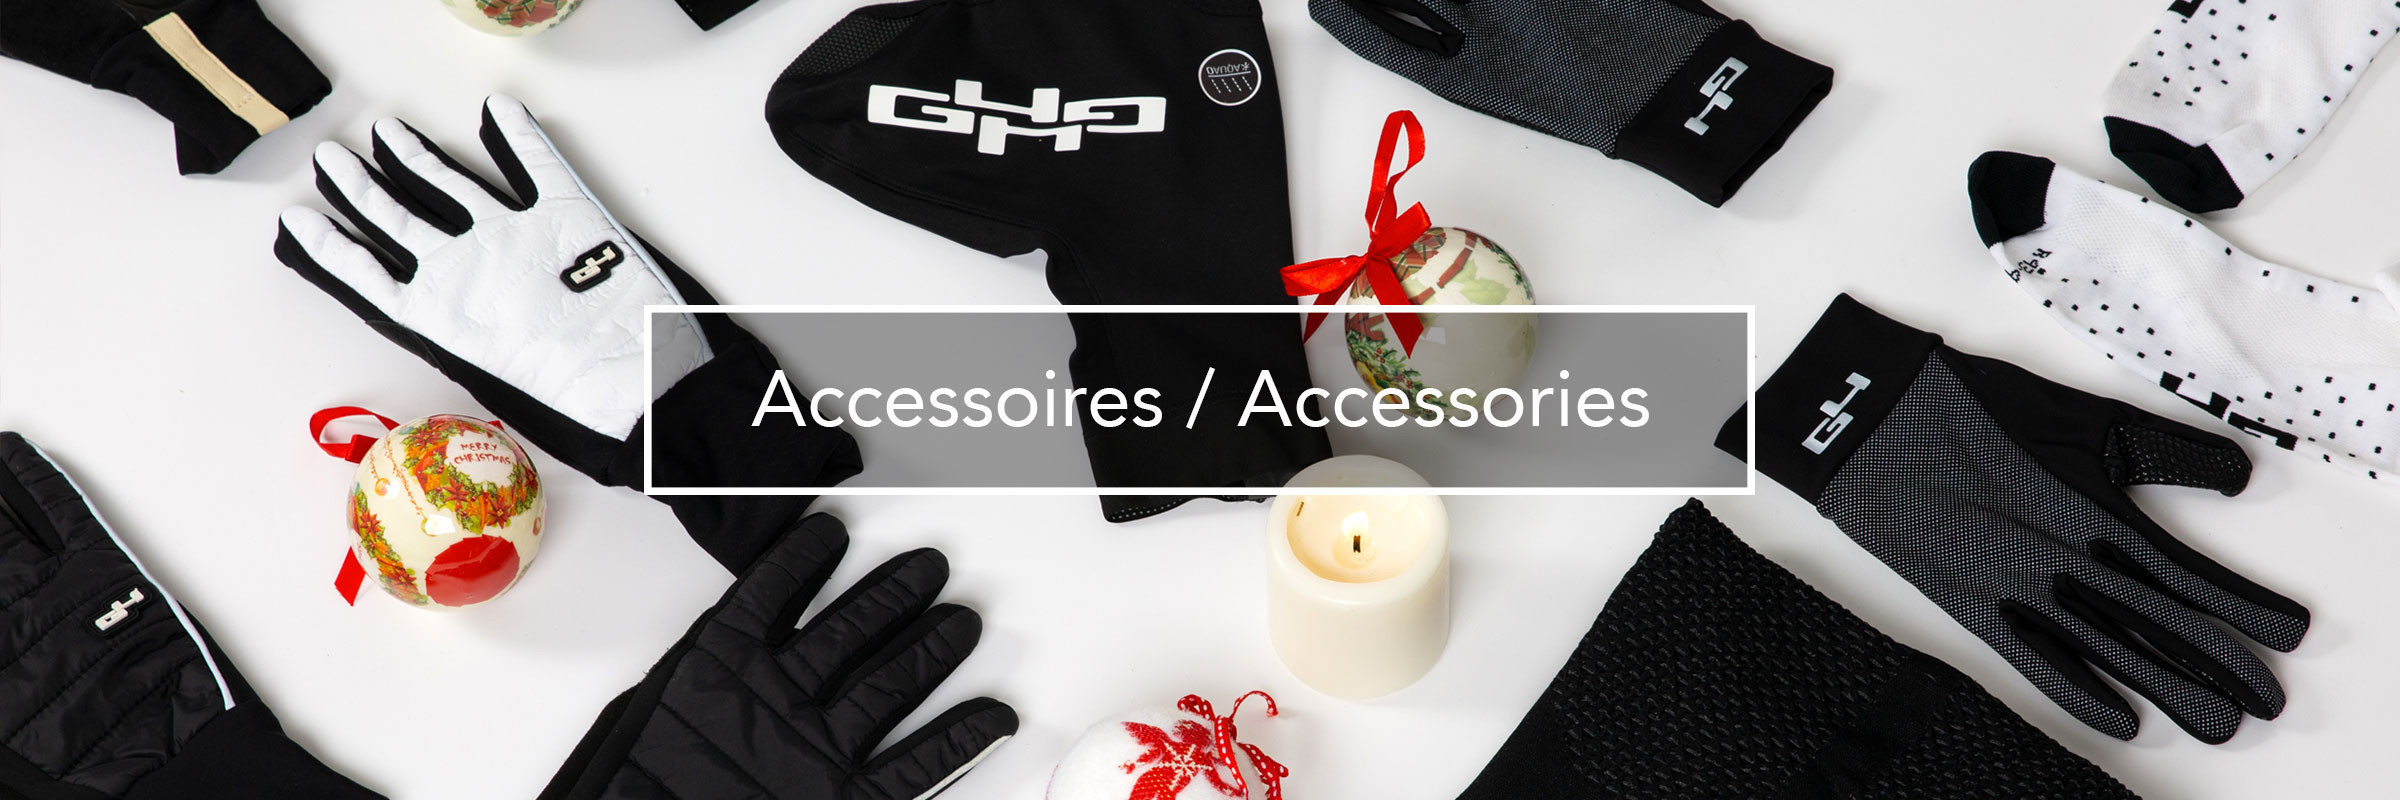 G4 exceptional cycling accessories